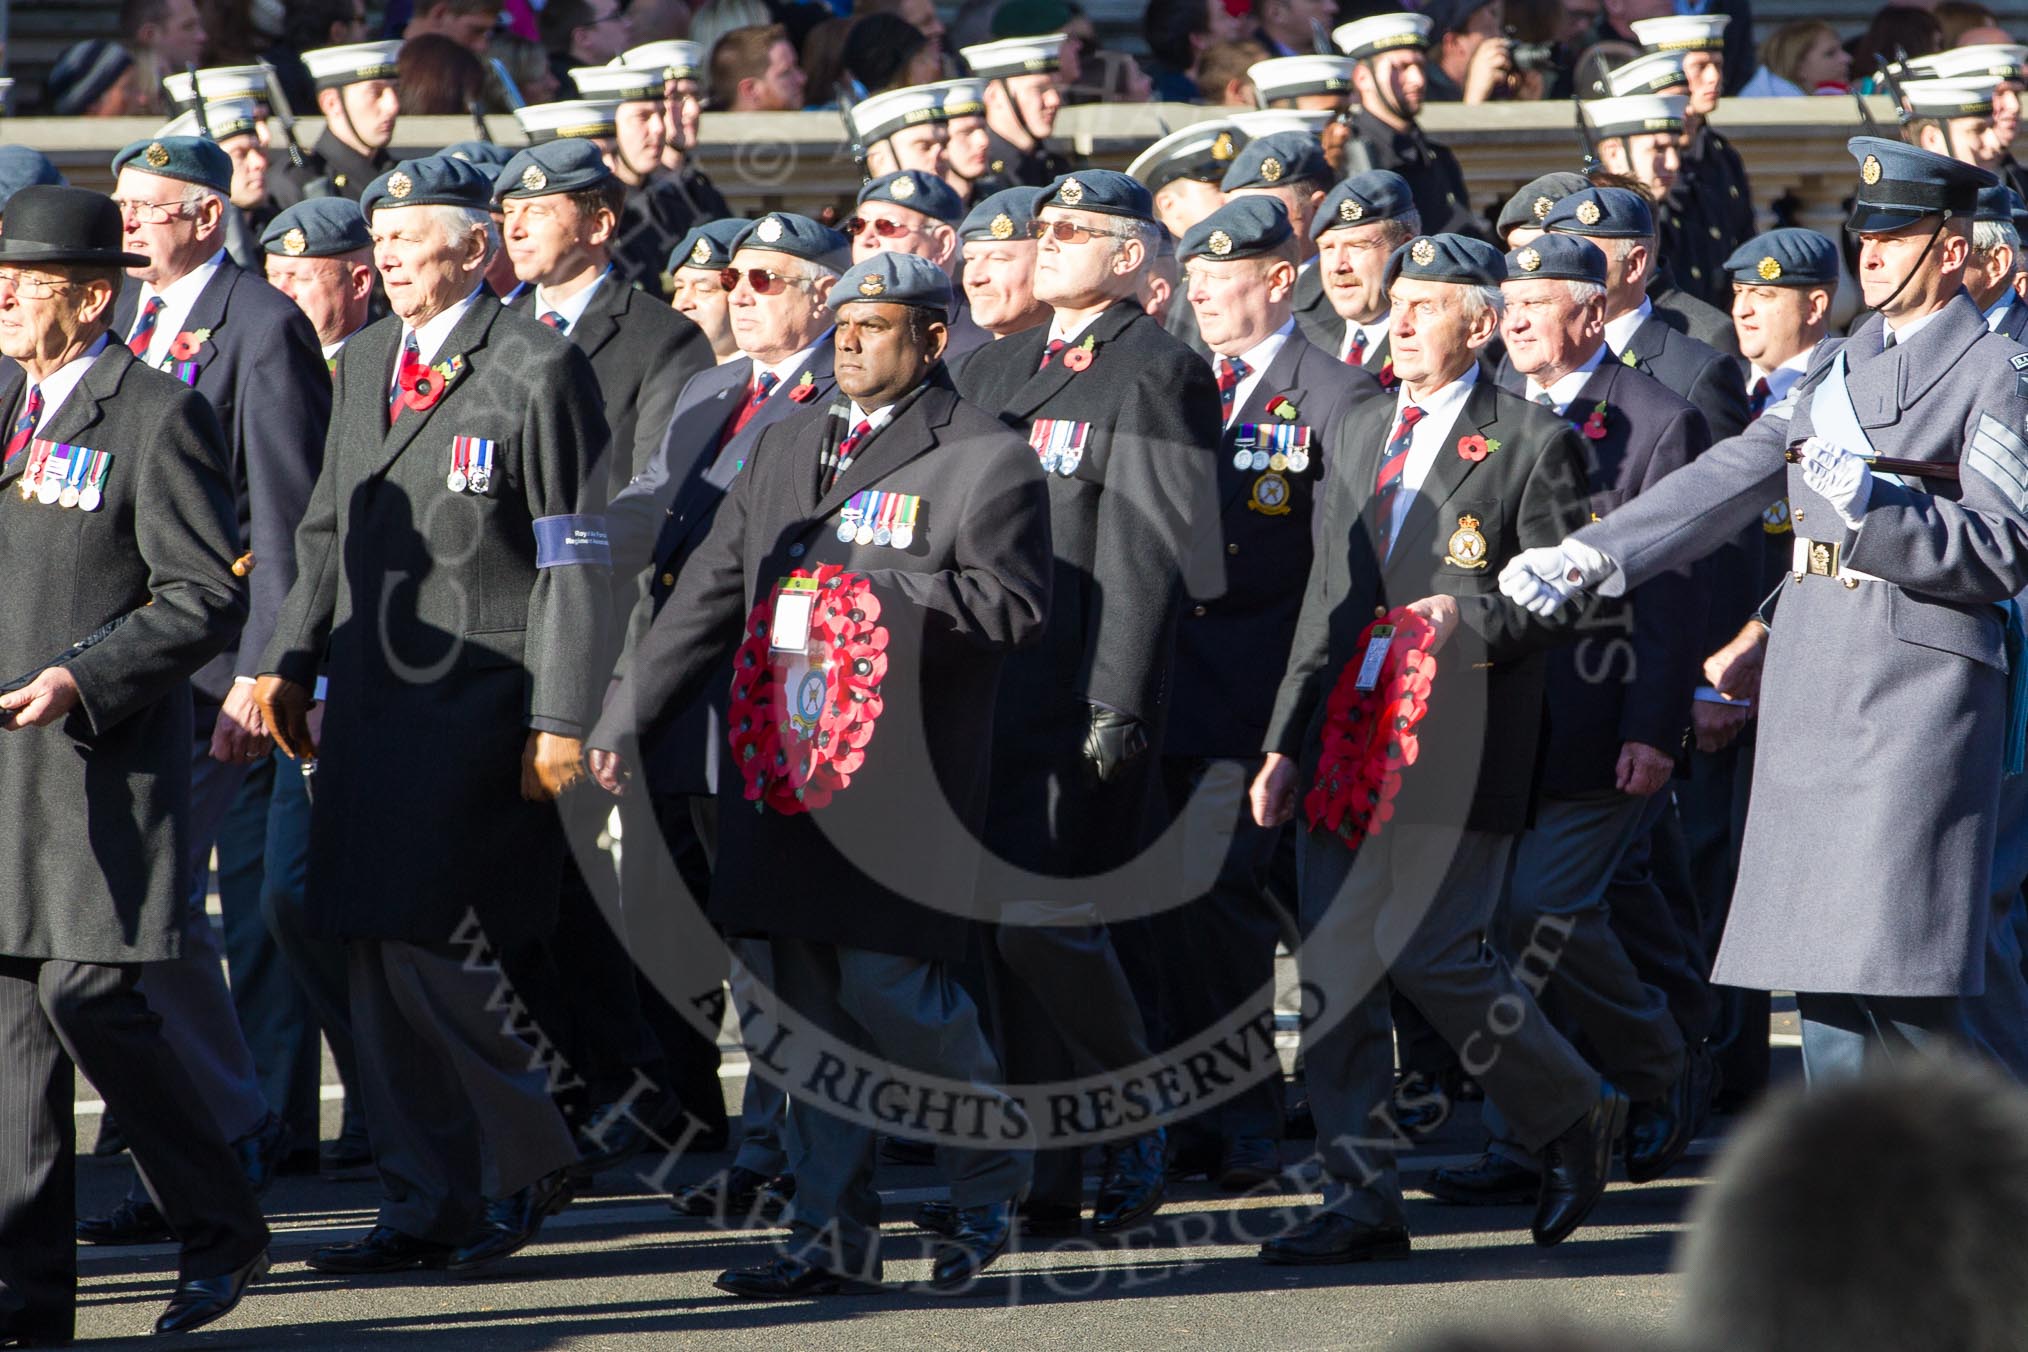 Remembrance Sunday 2012 Cenotaph March Past: Group C2 - Royal Air Force Regiment Association..
Whitehall, Cenotaph,
London SW1,

United Kingdom,
on 11 November 2012 at 12:00, image #1045